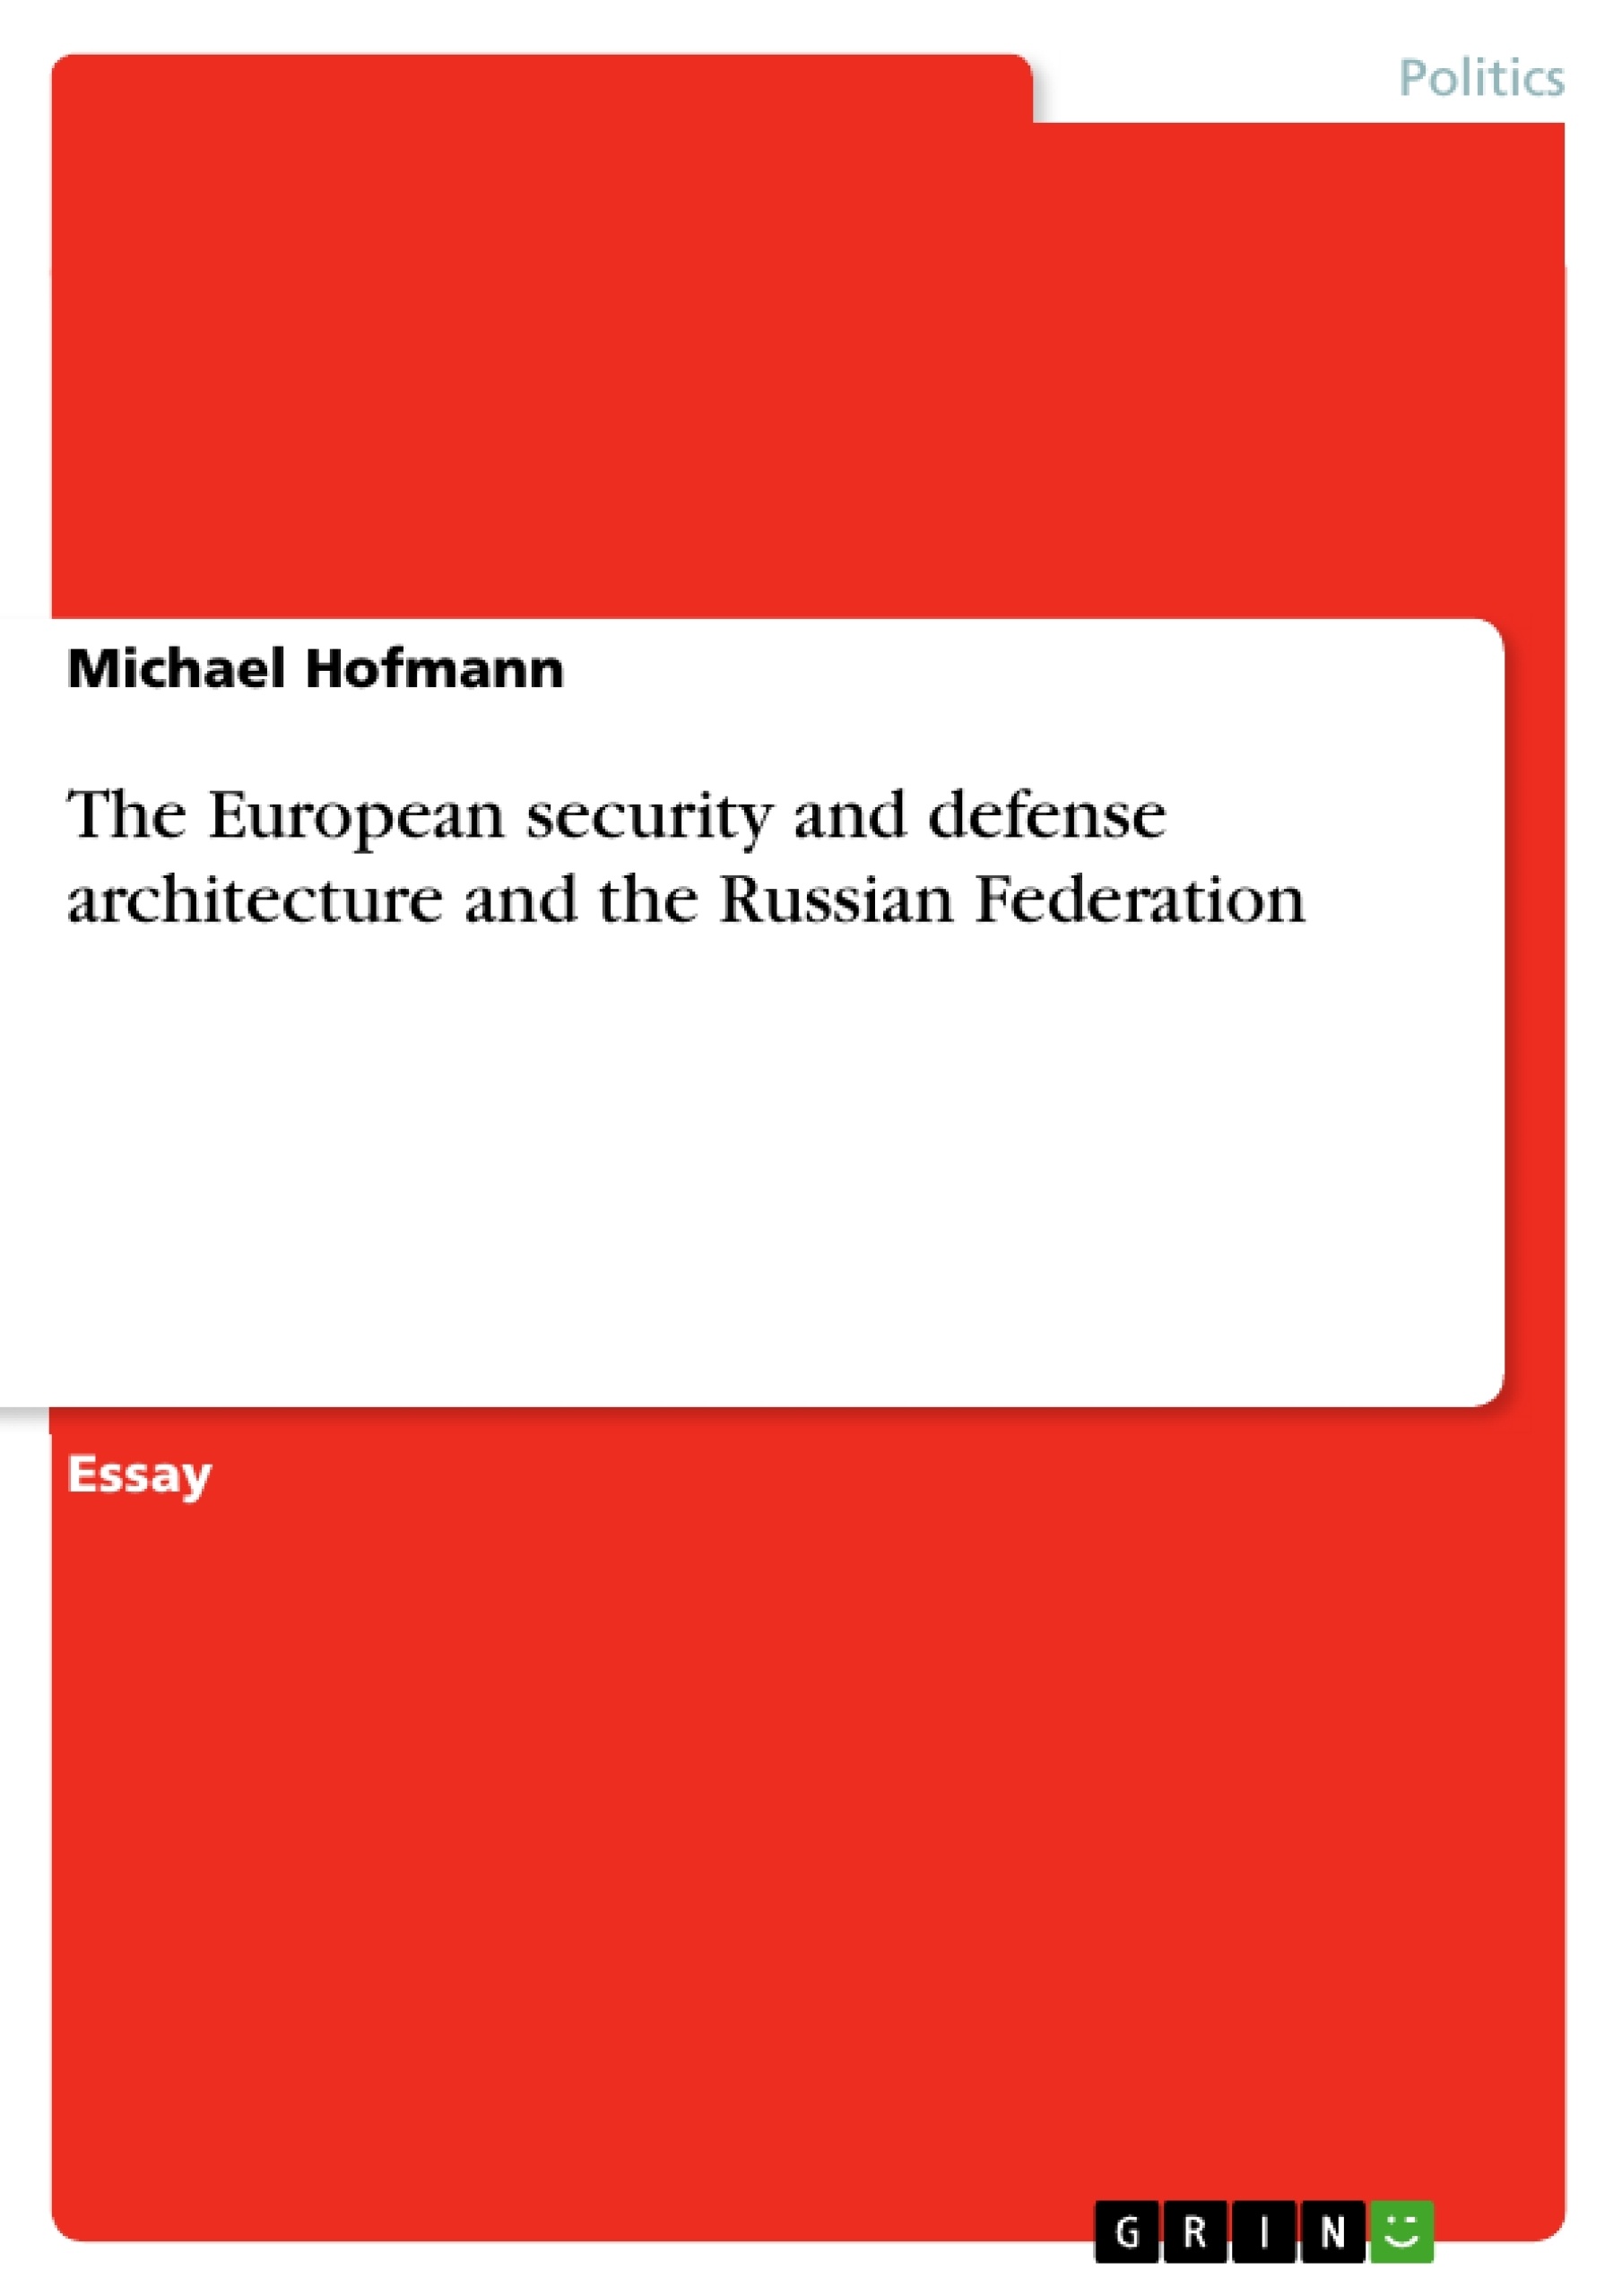 Titel: The European security and defense architecture and the Russian Federation